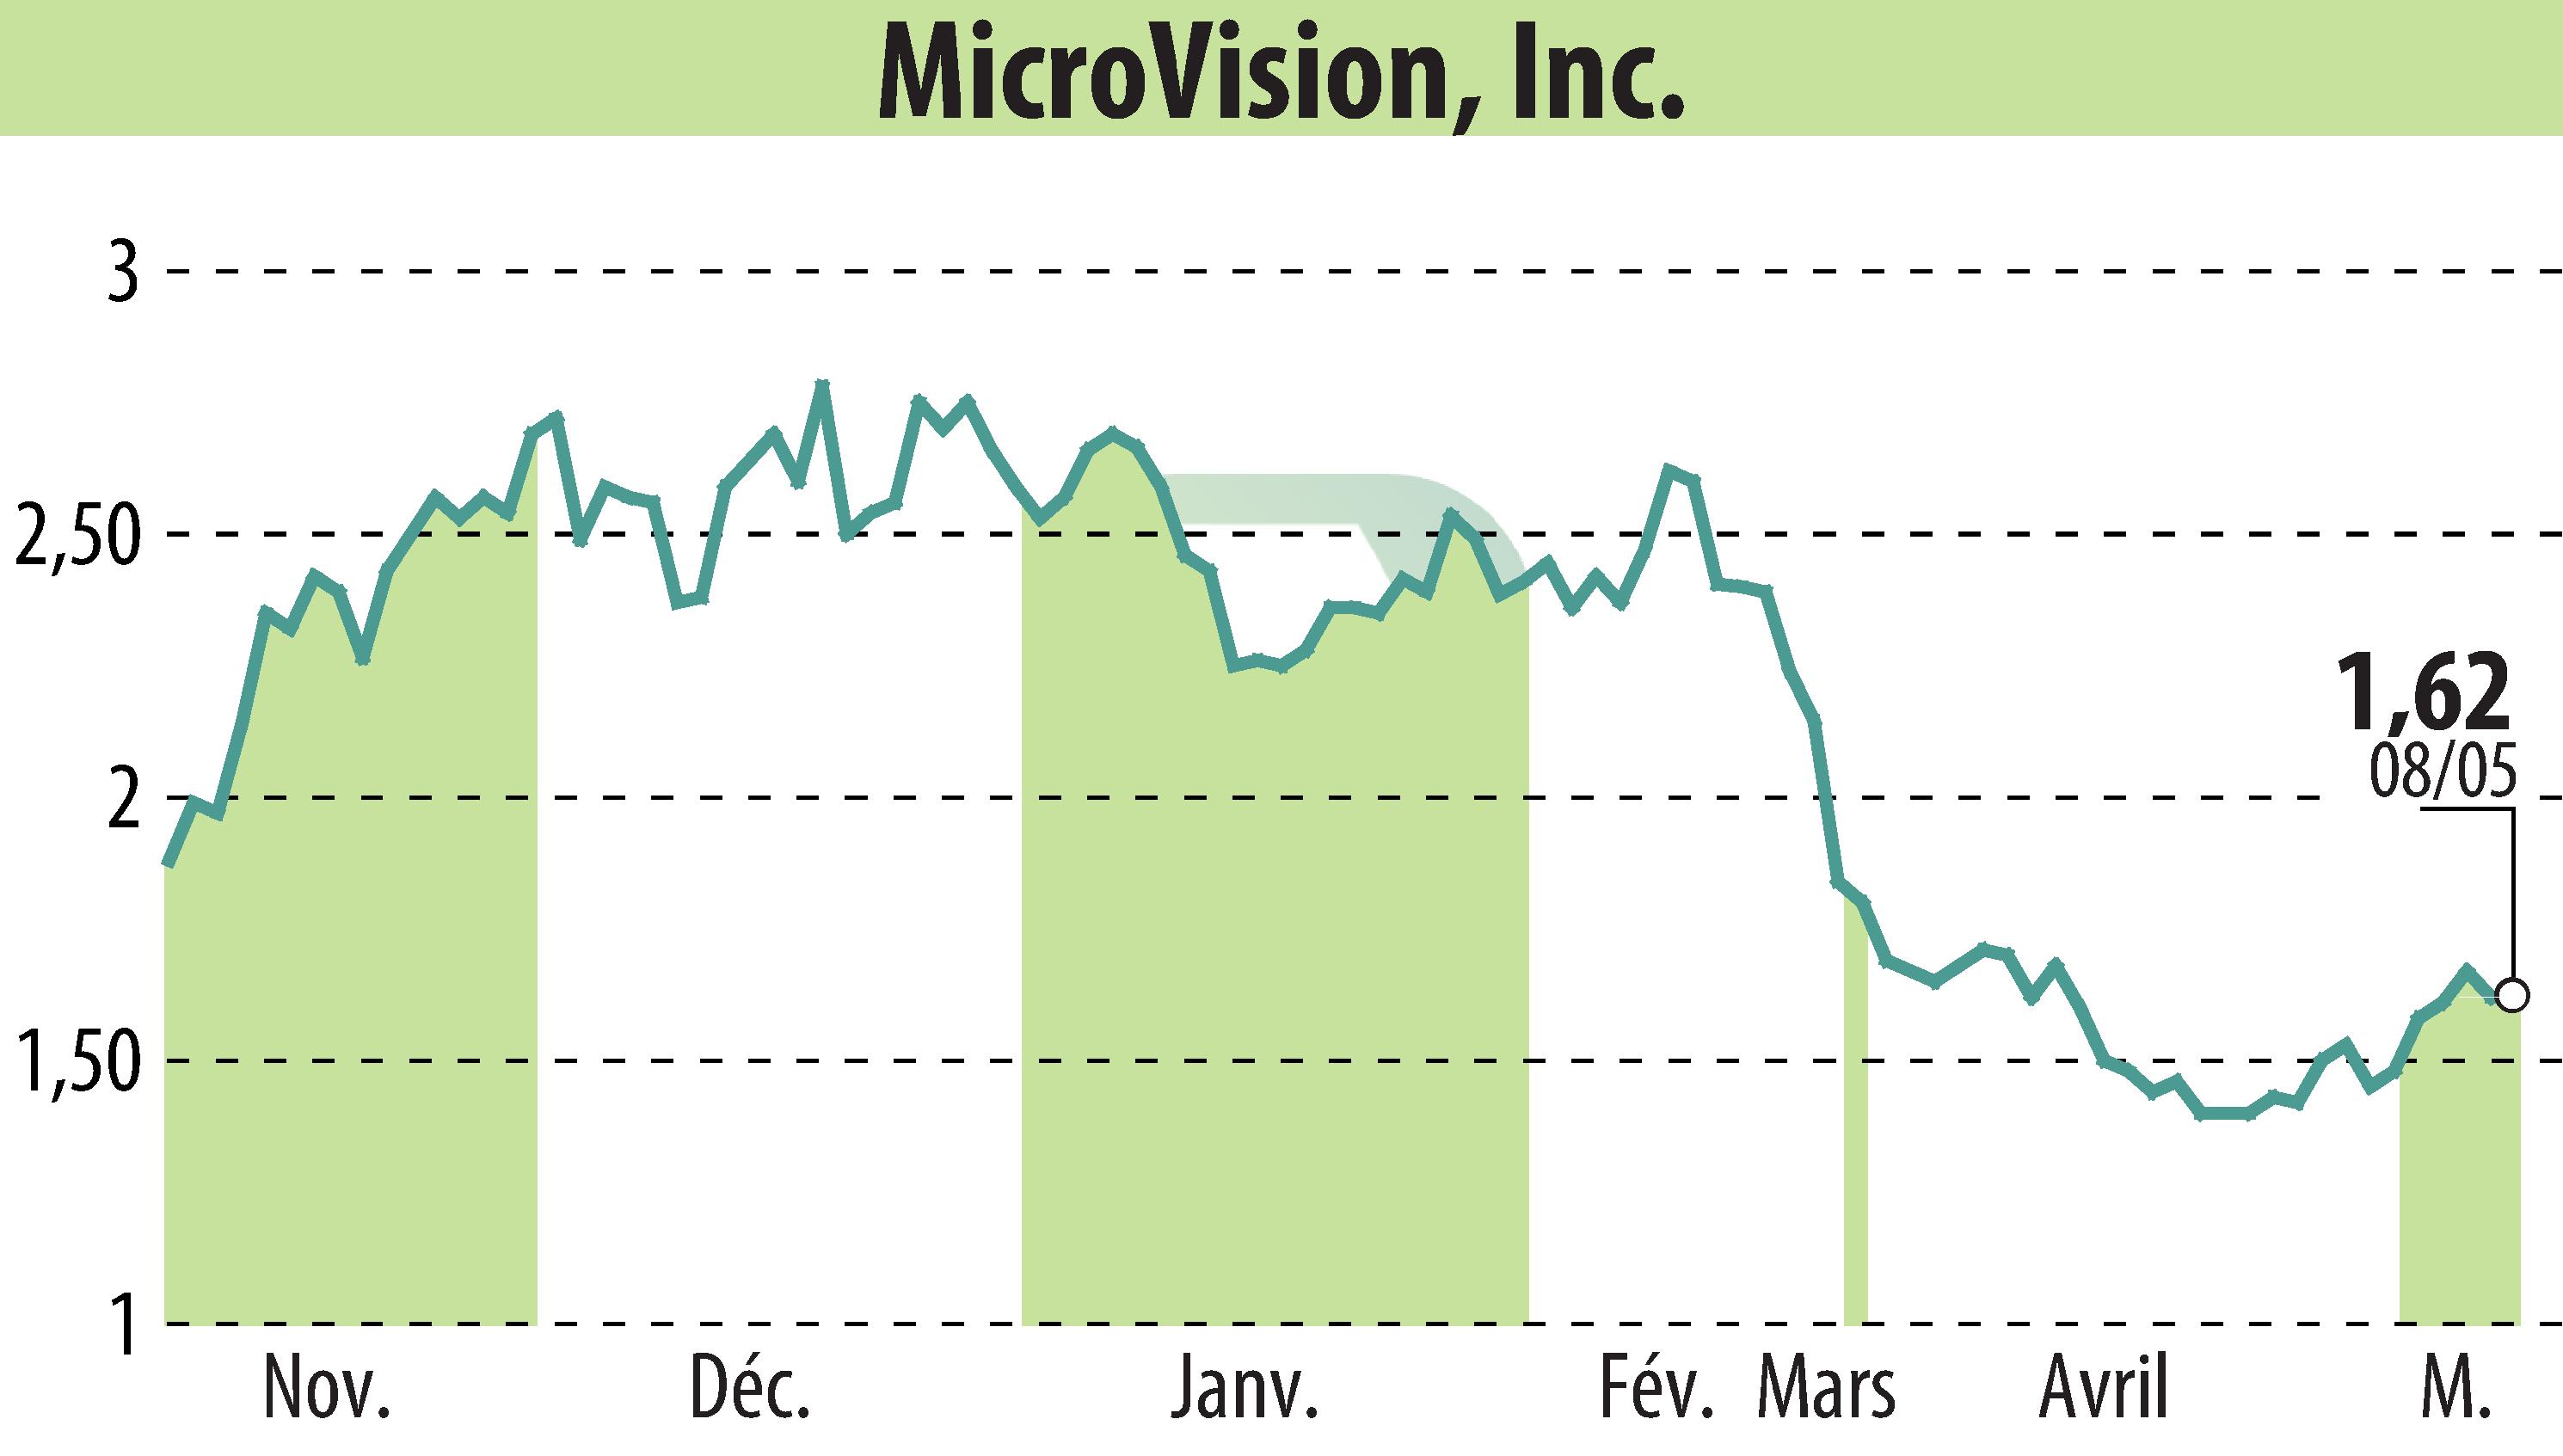 Stock price chart of MicroVision, Inc. (EBR:MVIS) showing fluctuations.